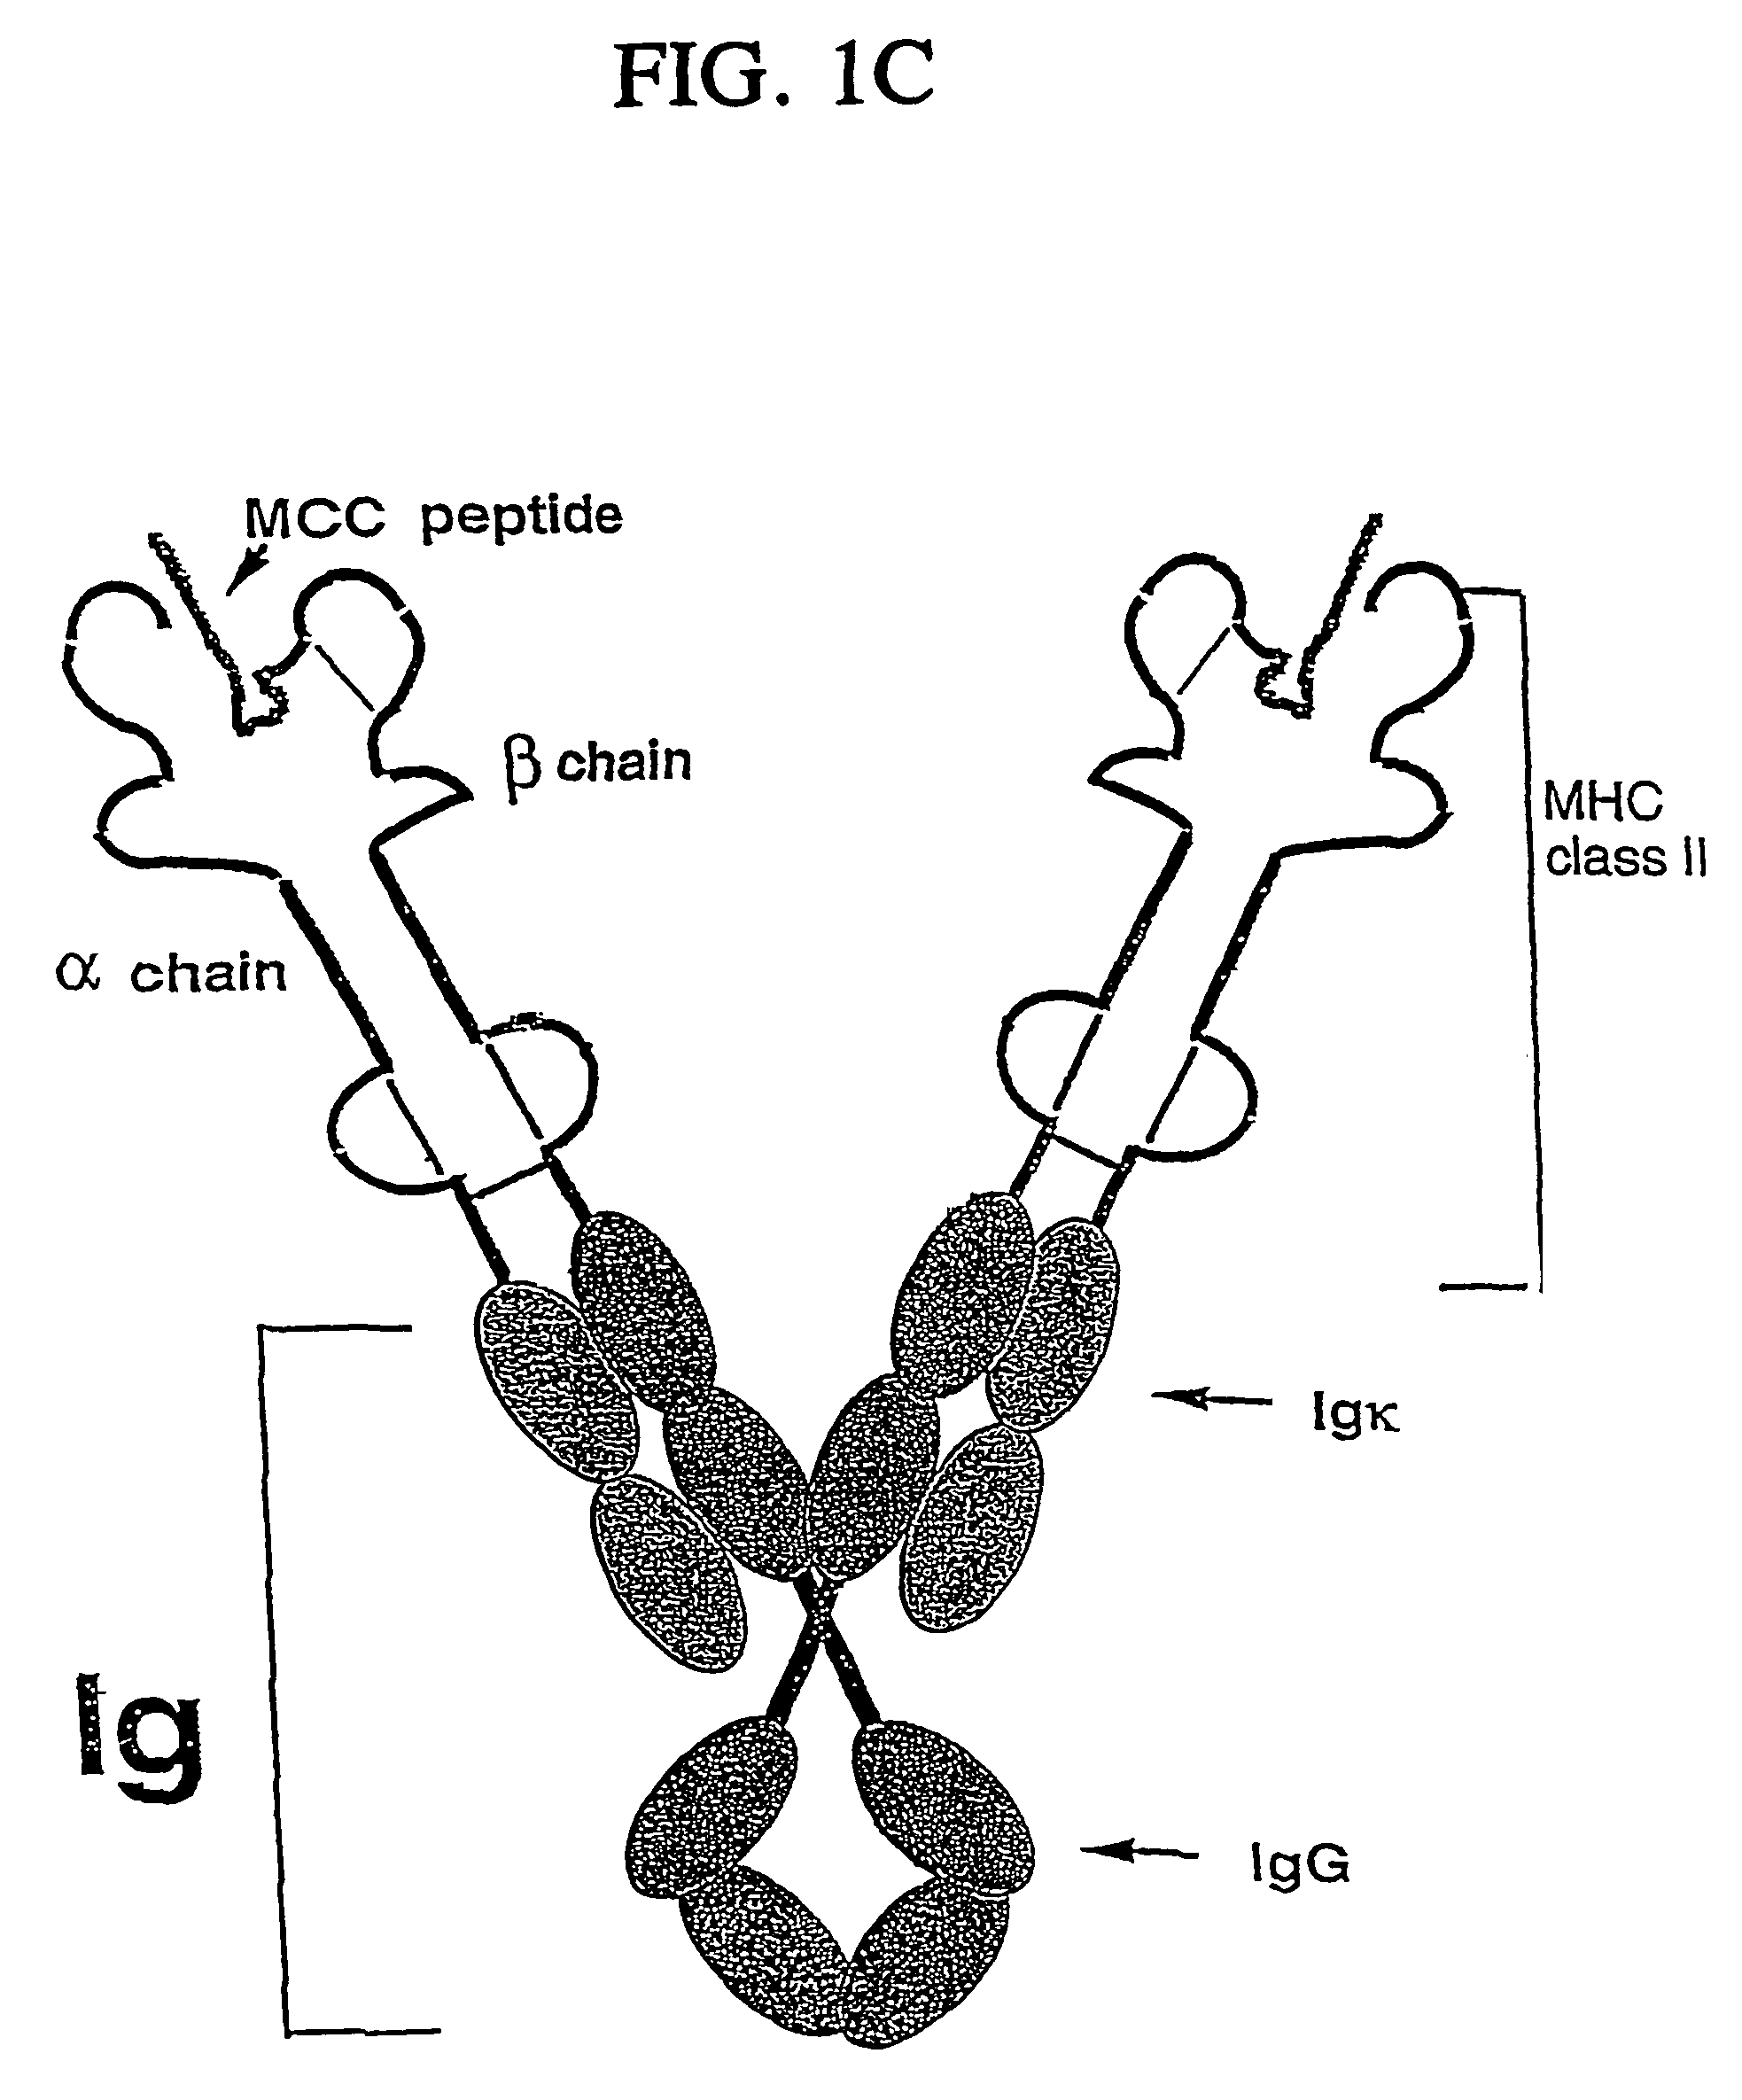 Cell compositions comprising molecular complexes that modify immune responses